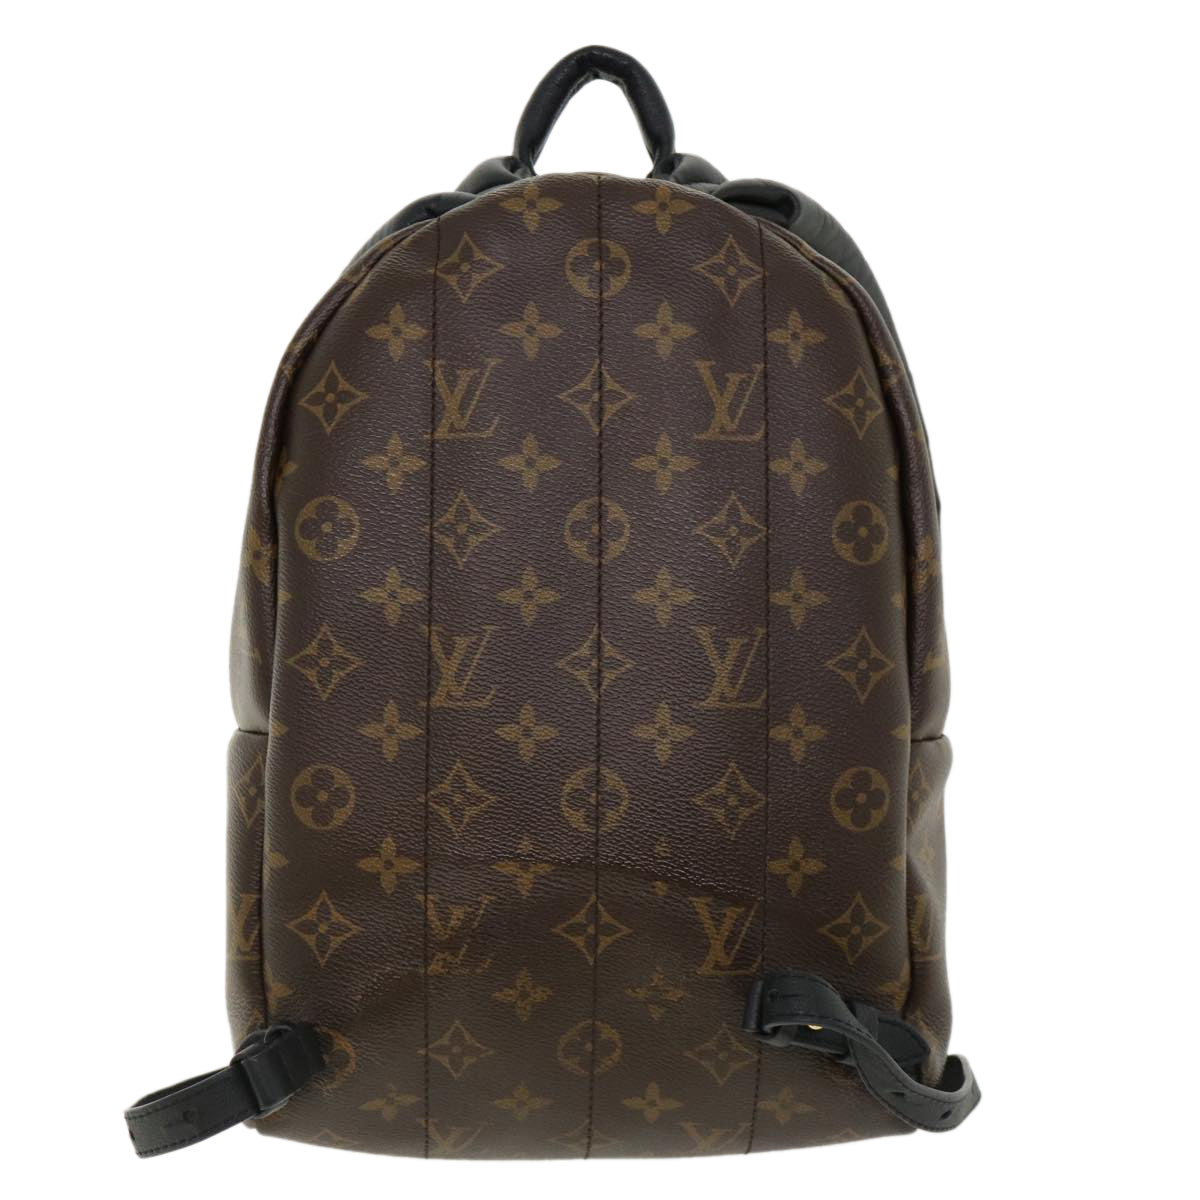 LOUIS VUITTON Monogram Palm Springs PM Backpack M41560 LV Auth bs2081 - 0